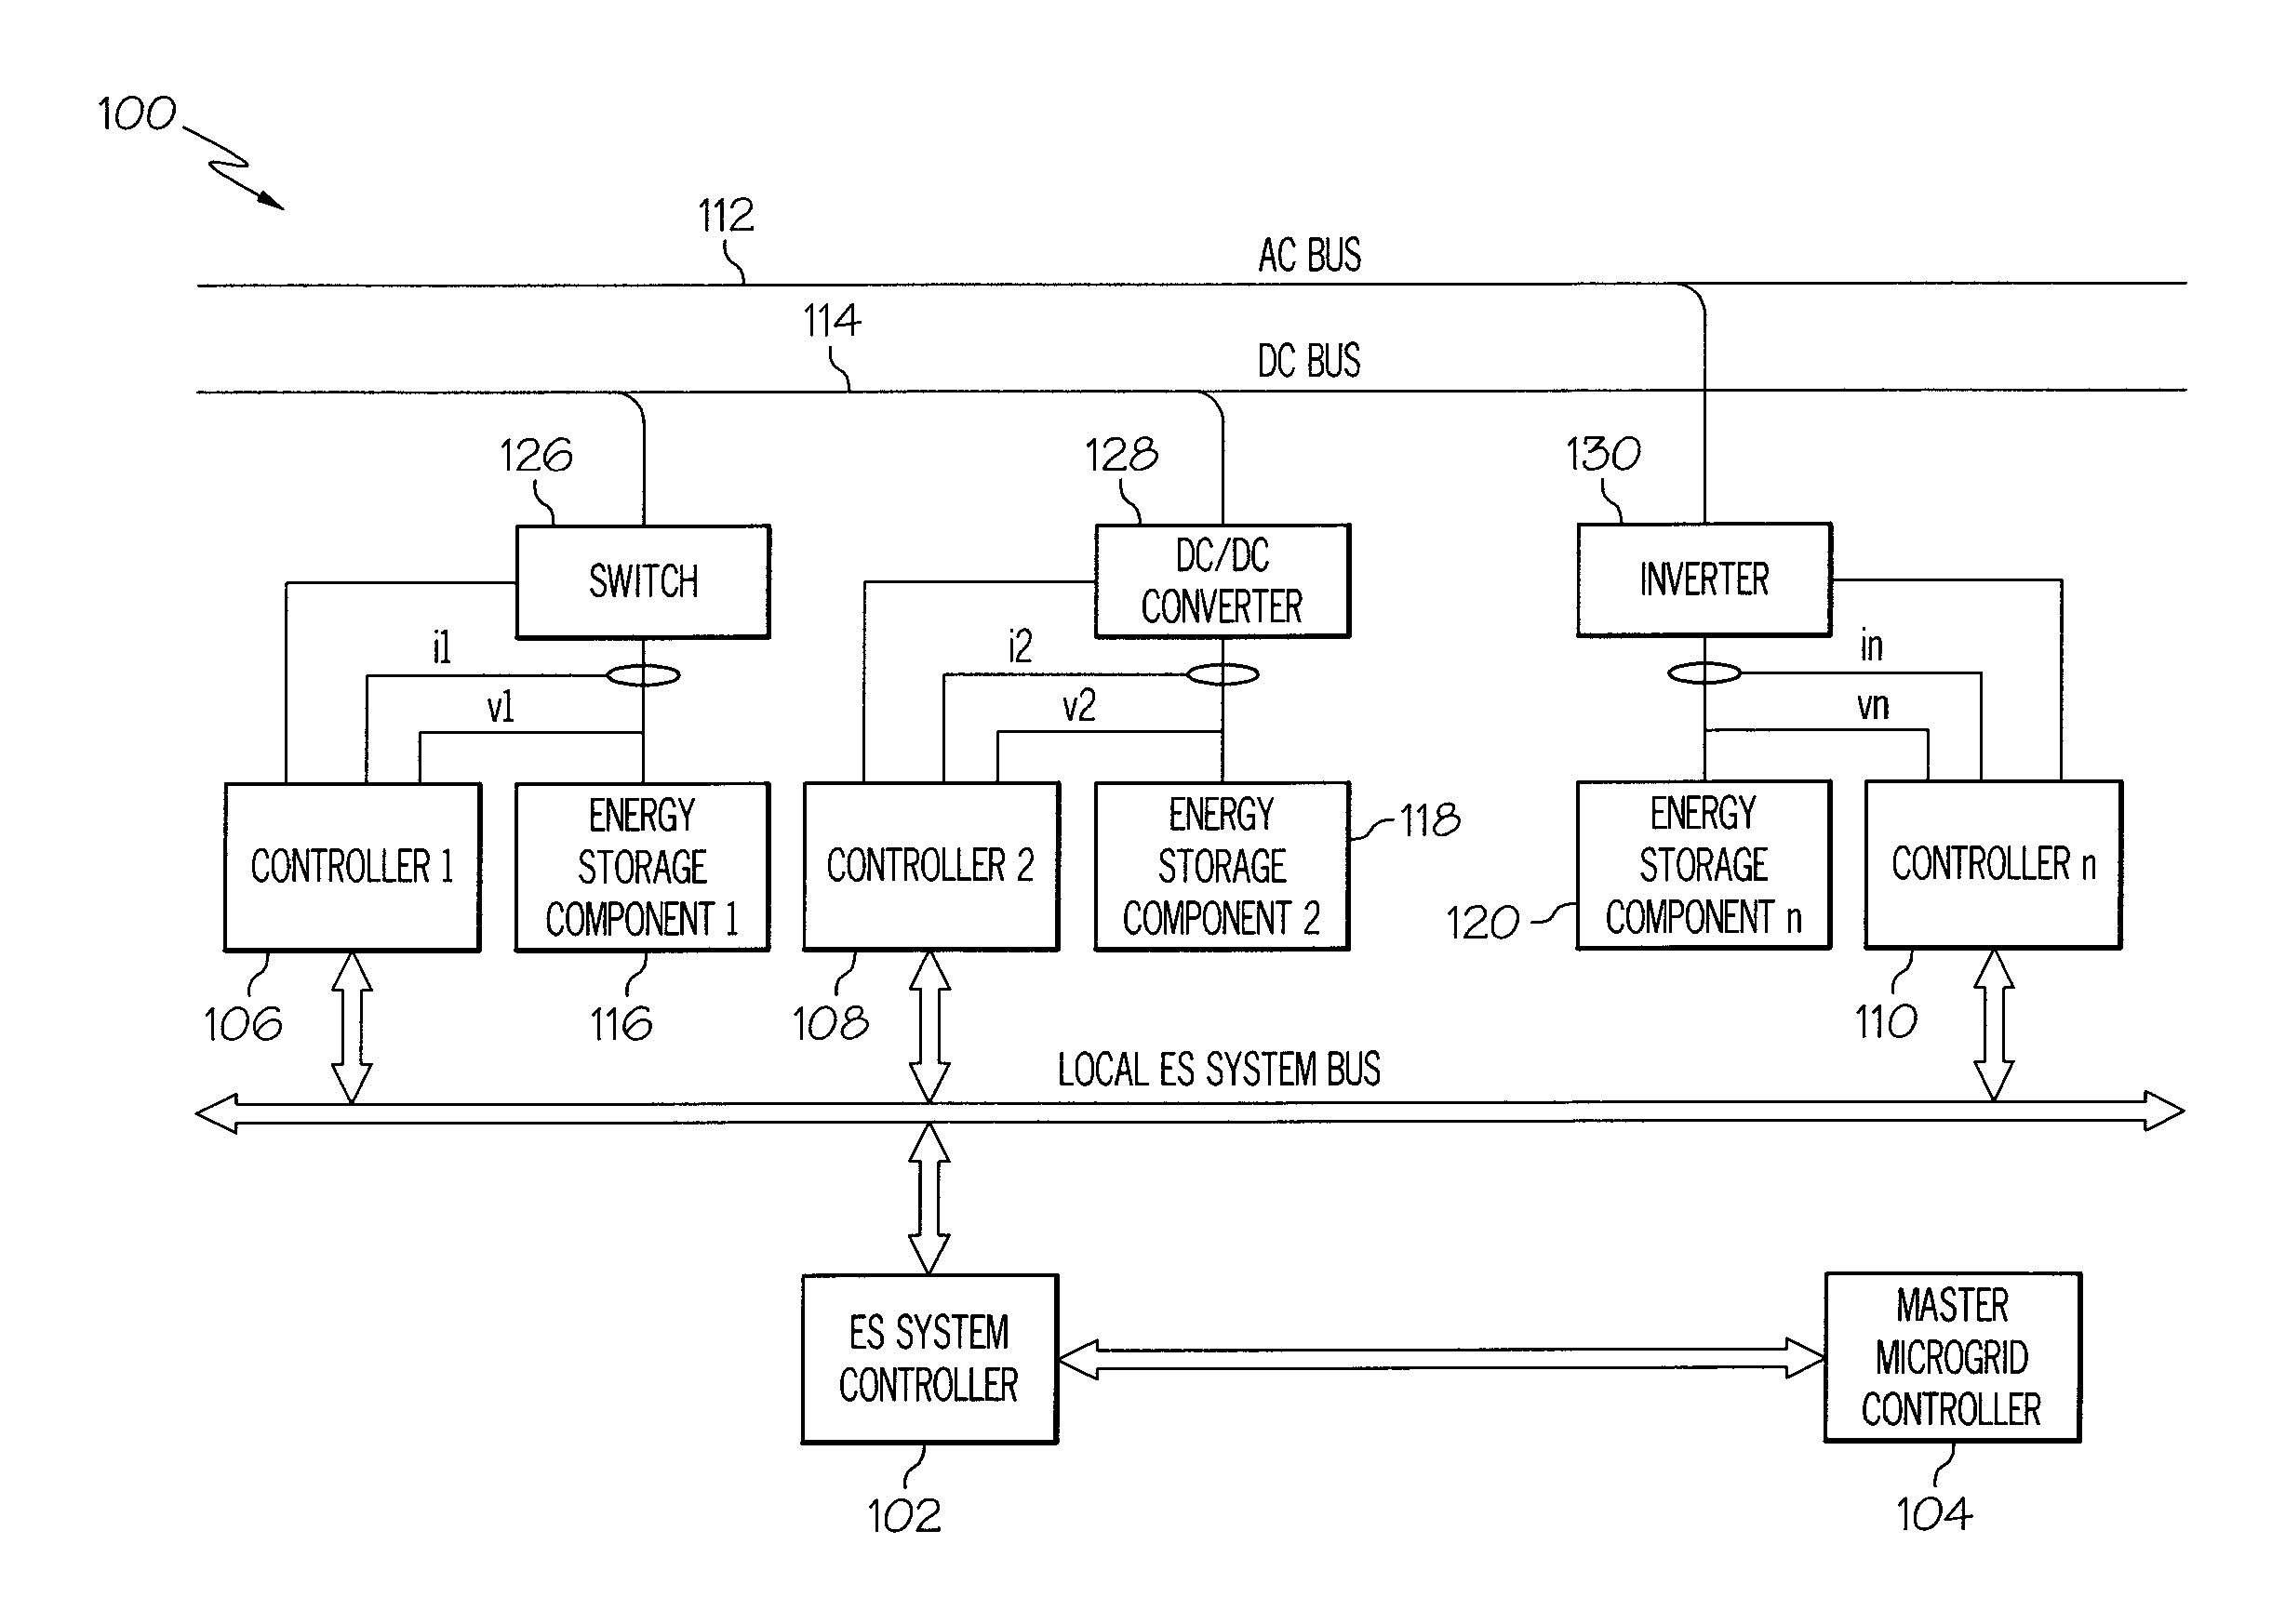 Method and apparatus for effective utilization of energy storage components within a microgrid